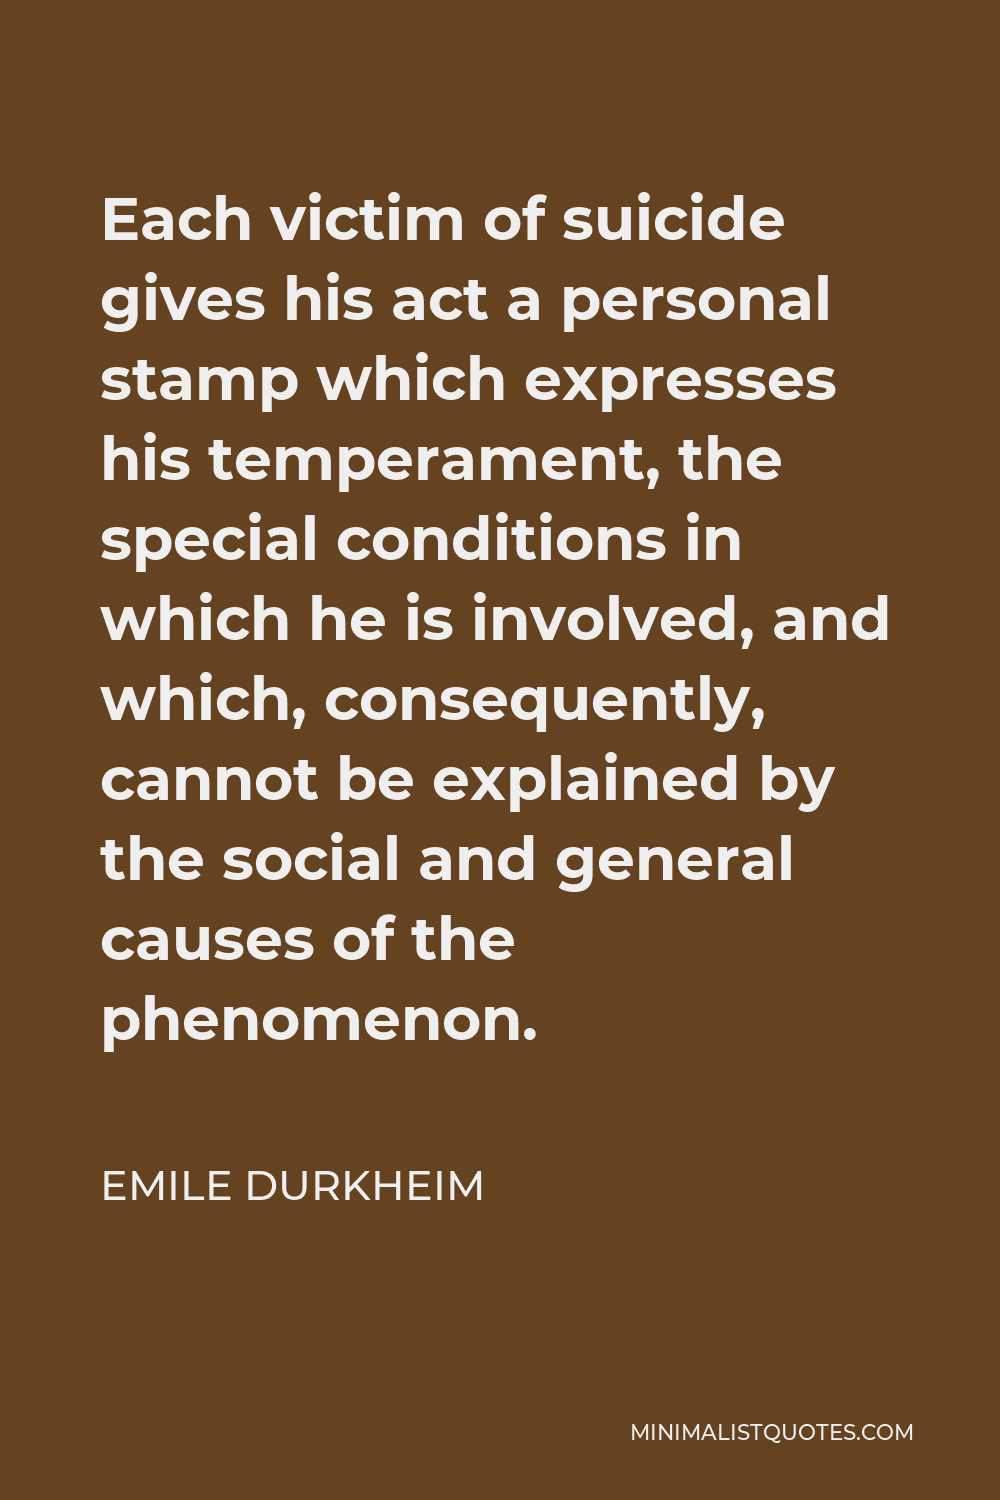 Emile Durkheim Quote - Each victim of suicide gives his act a personal stamp which expresses his temperament, the special conditions in which he is involved, and which, consequently, cannot be explained by the social and general causes of the phenomenon.